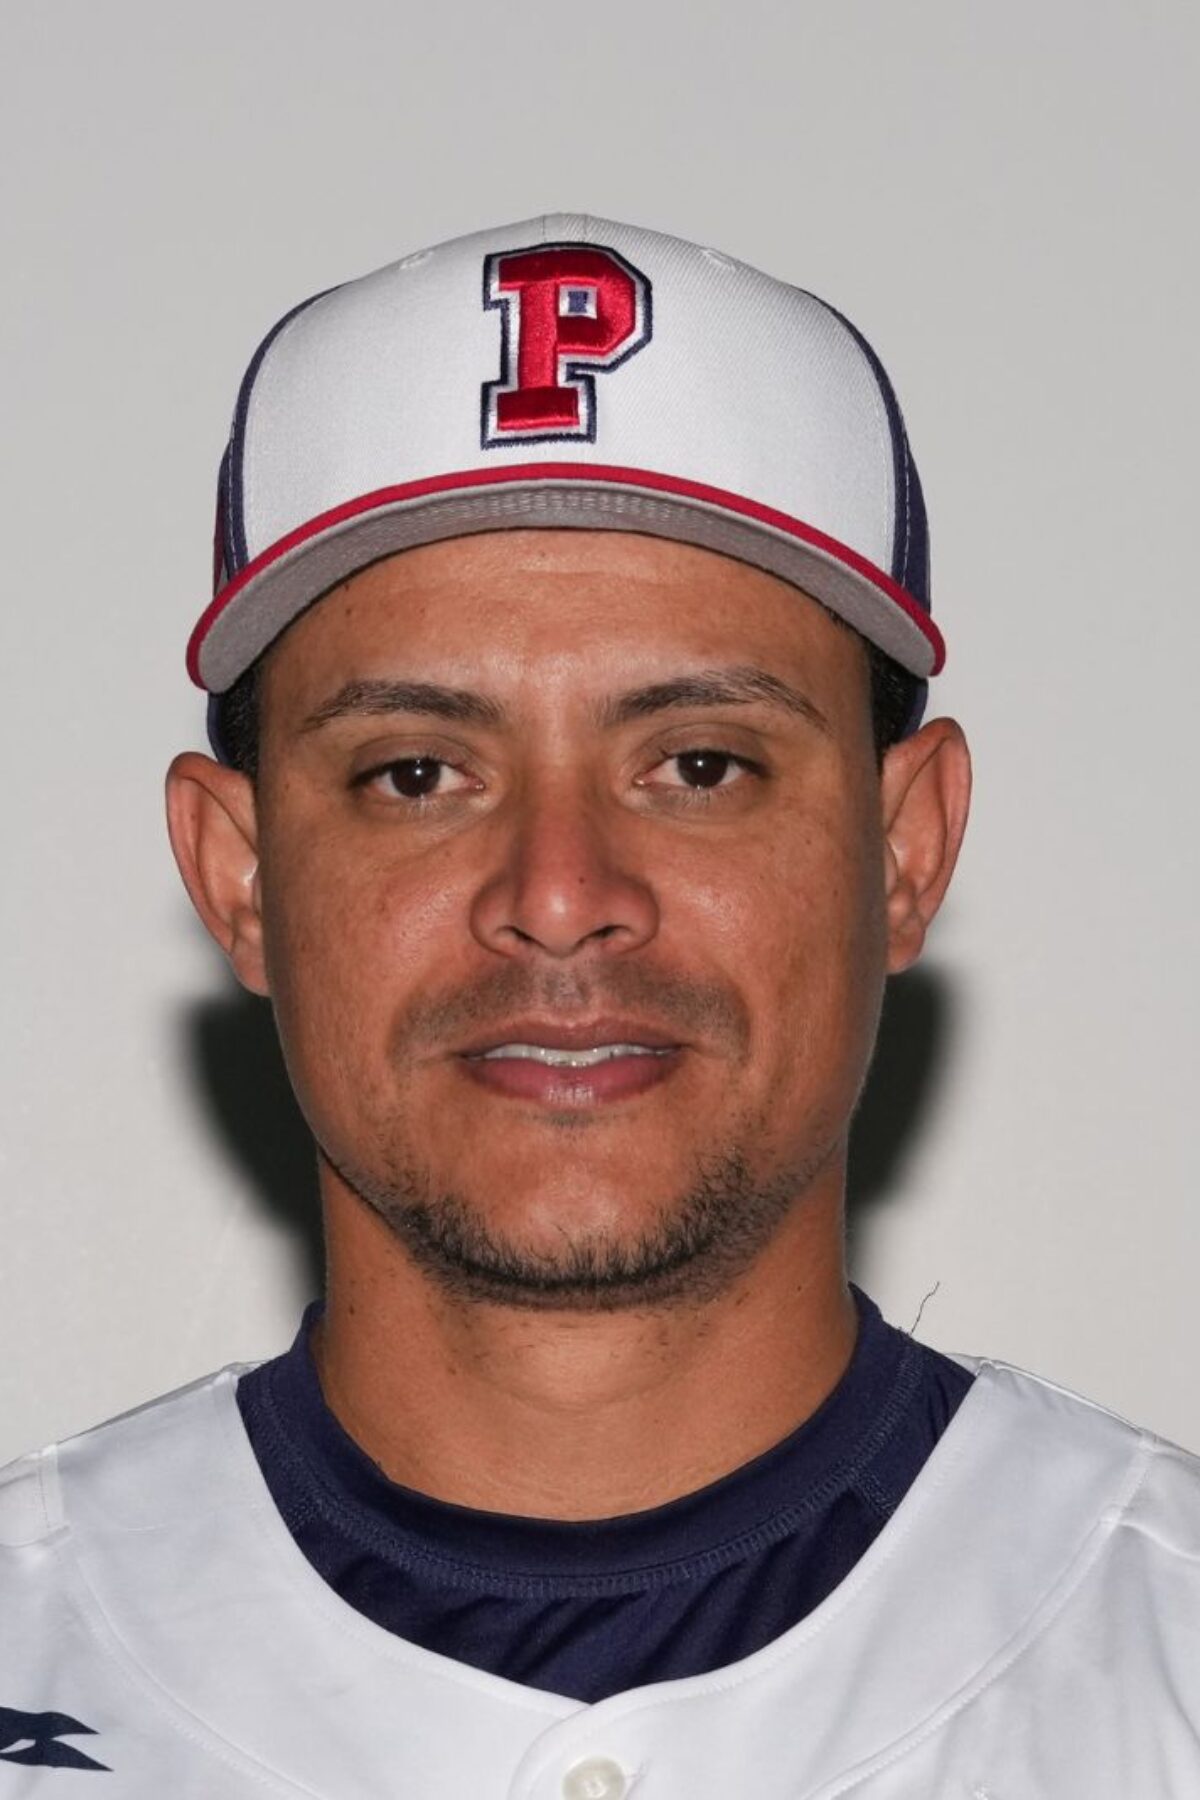 TAICHUNG, TAIWAN - MARCH 04: Luis Castillo #89 of Team Panama poses for a photo during the Team Italy 2023 World Baseball Classic Headshots at University Stadium on Tuesday, March 7, 2023 in Taichung, Taiwan. (Photo by Mary DeCicco/WBCI/MLB Photos via Getty Images)